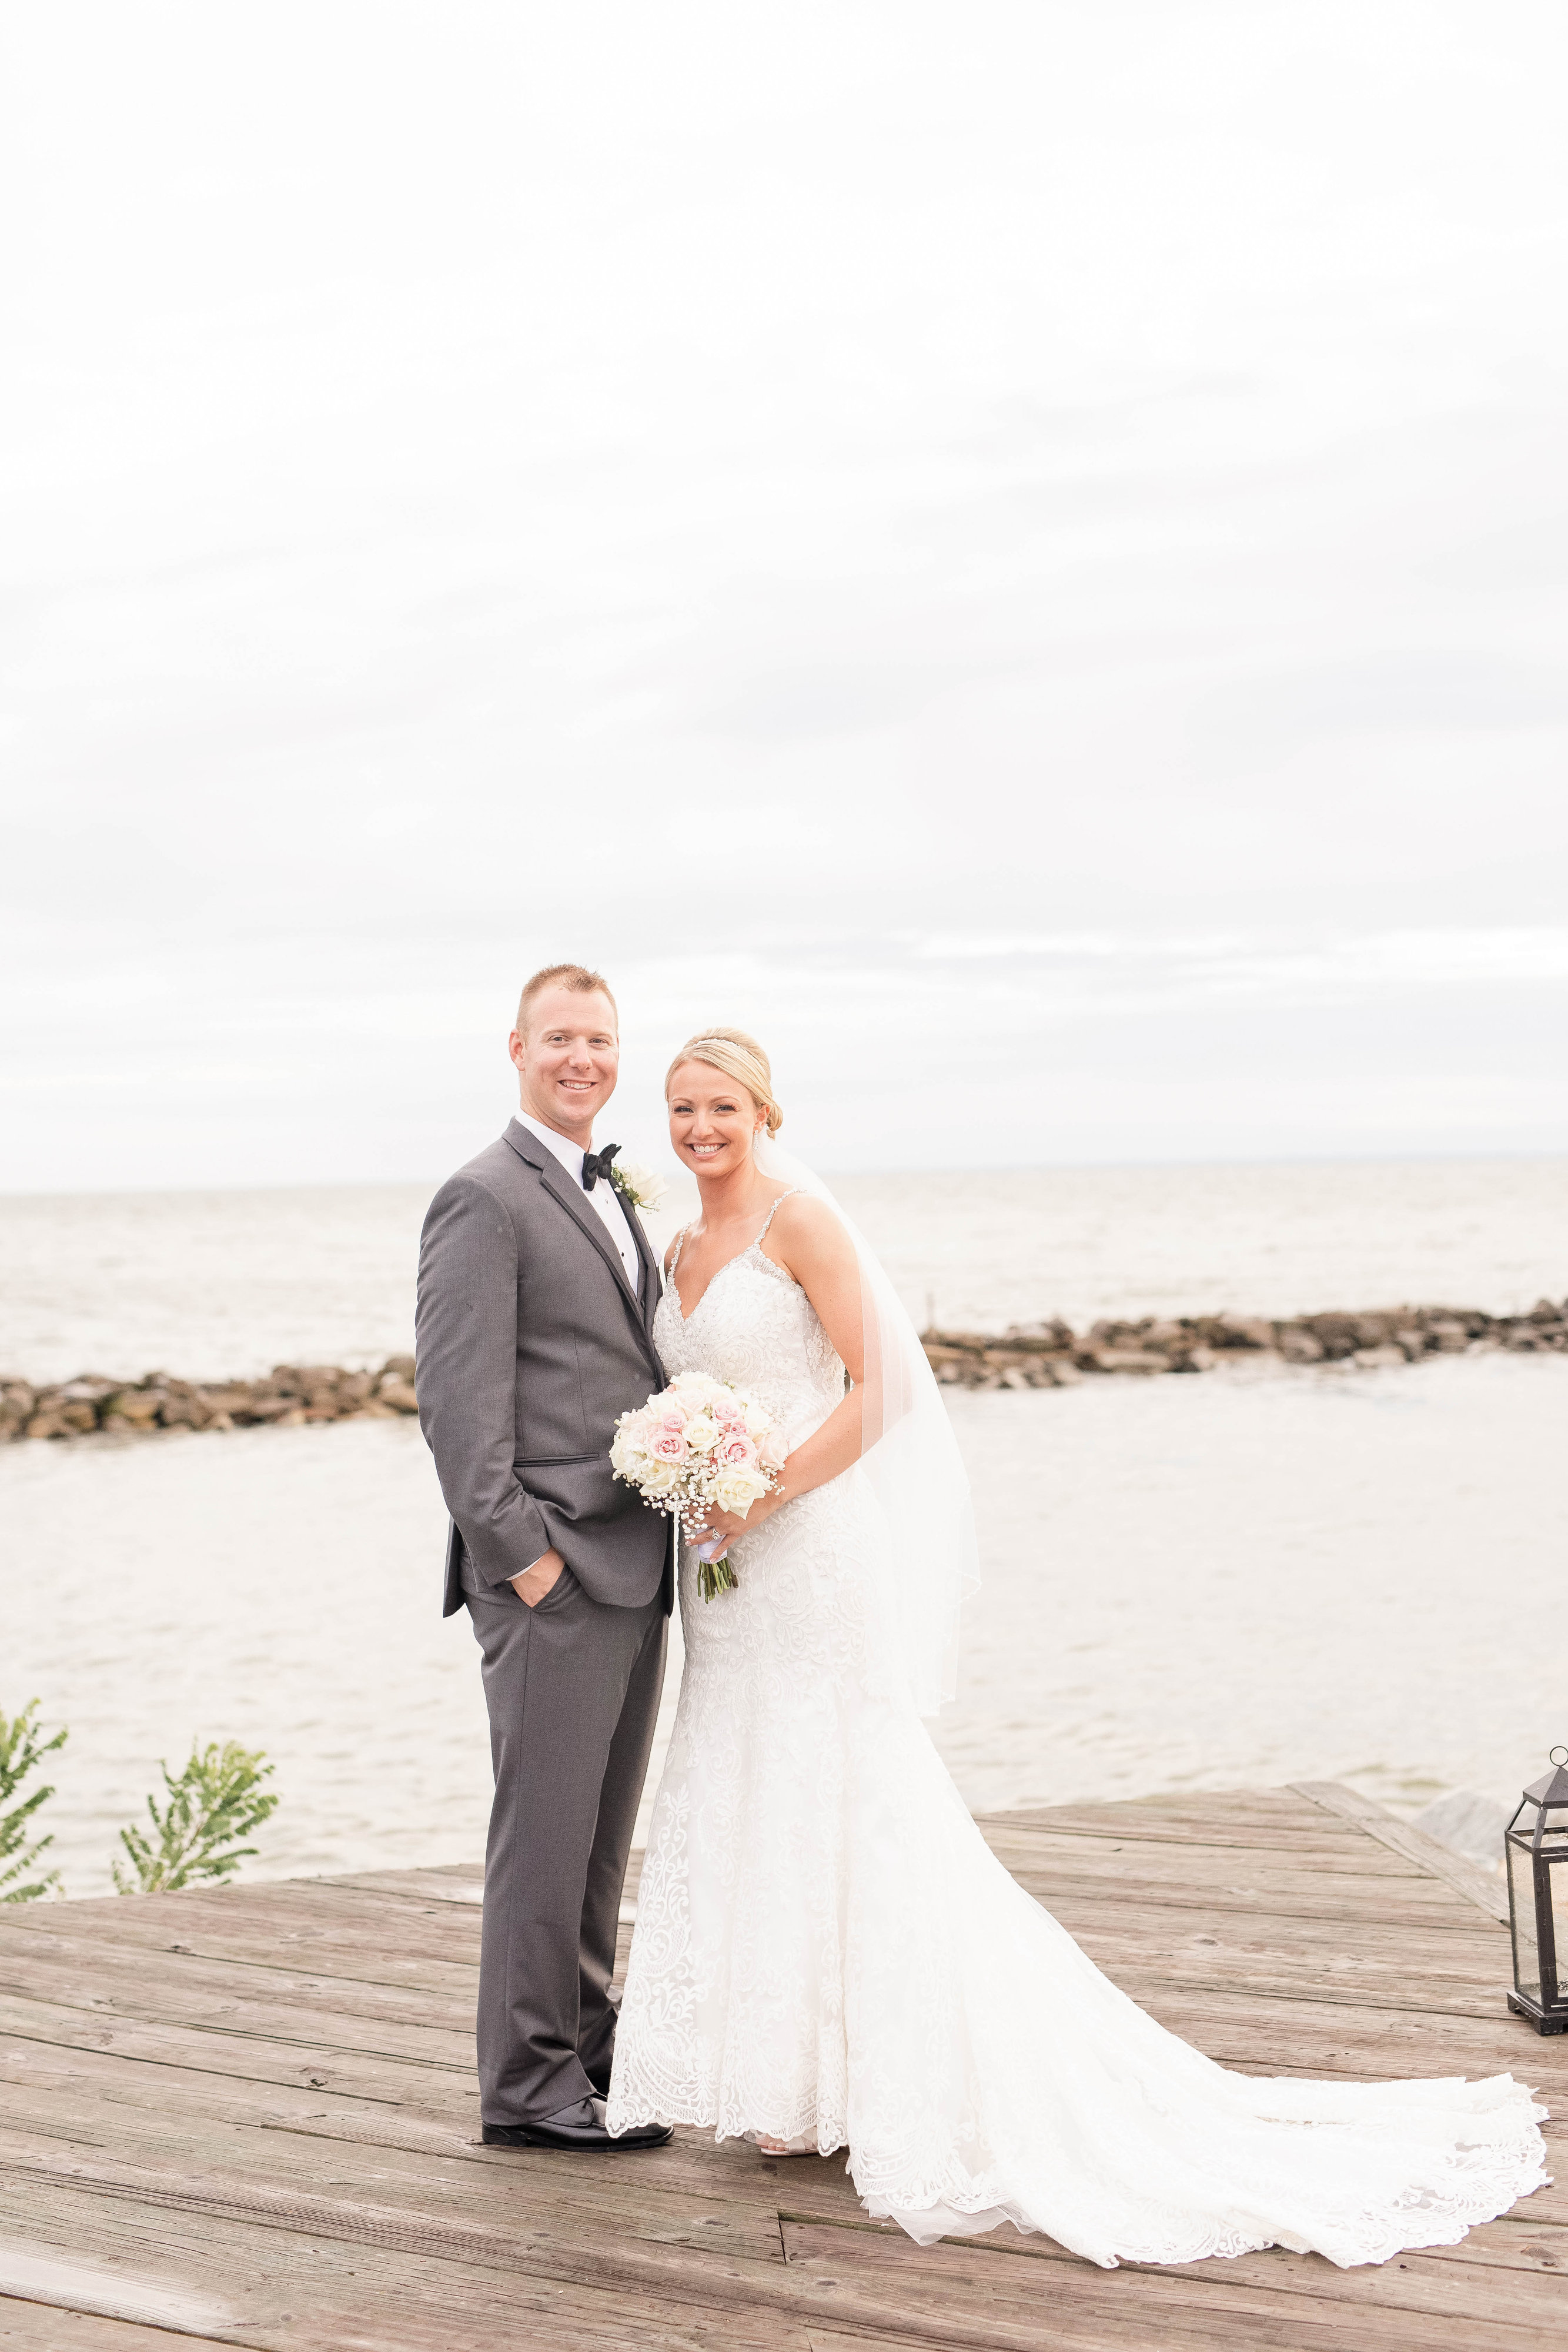 A Gorgeous Mary&#39;s Bride Celebrates an Unforgettable Beach Wedding Image